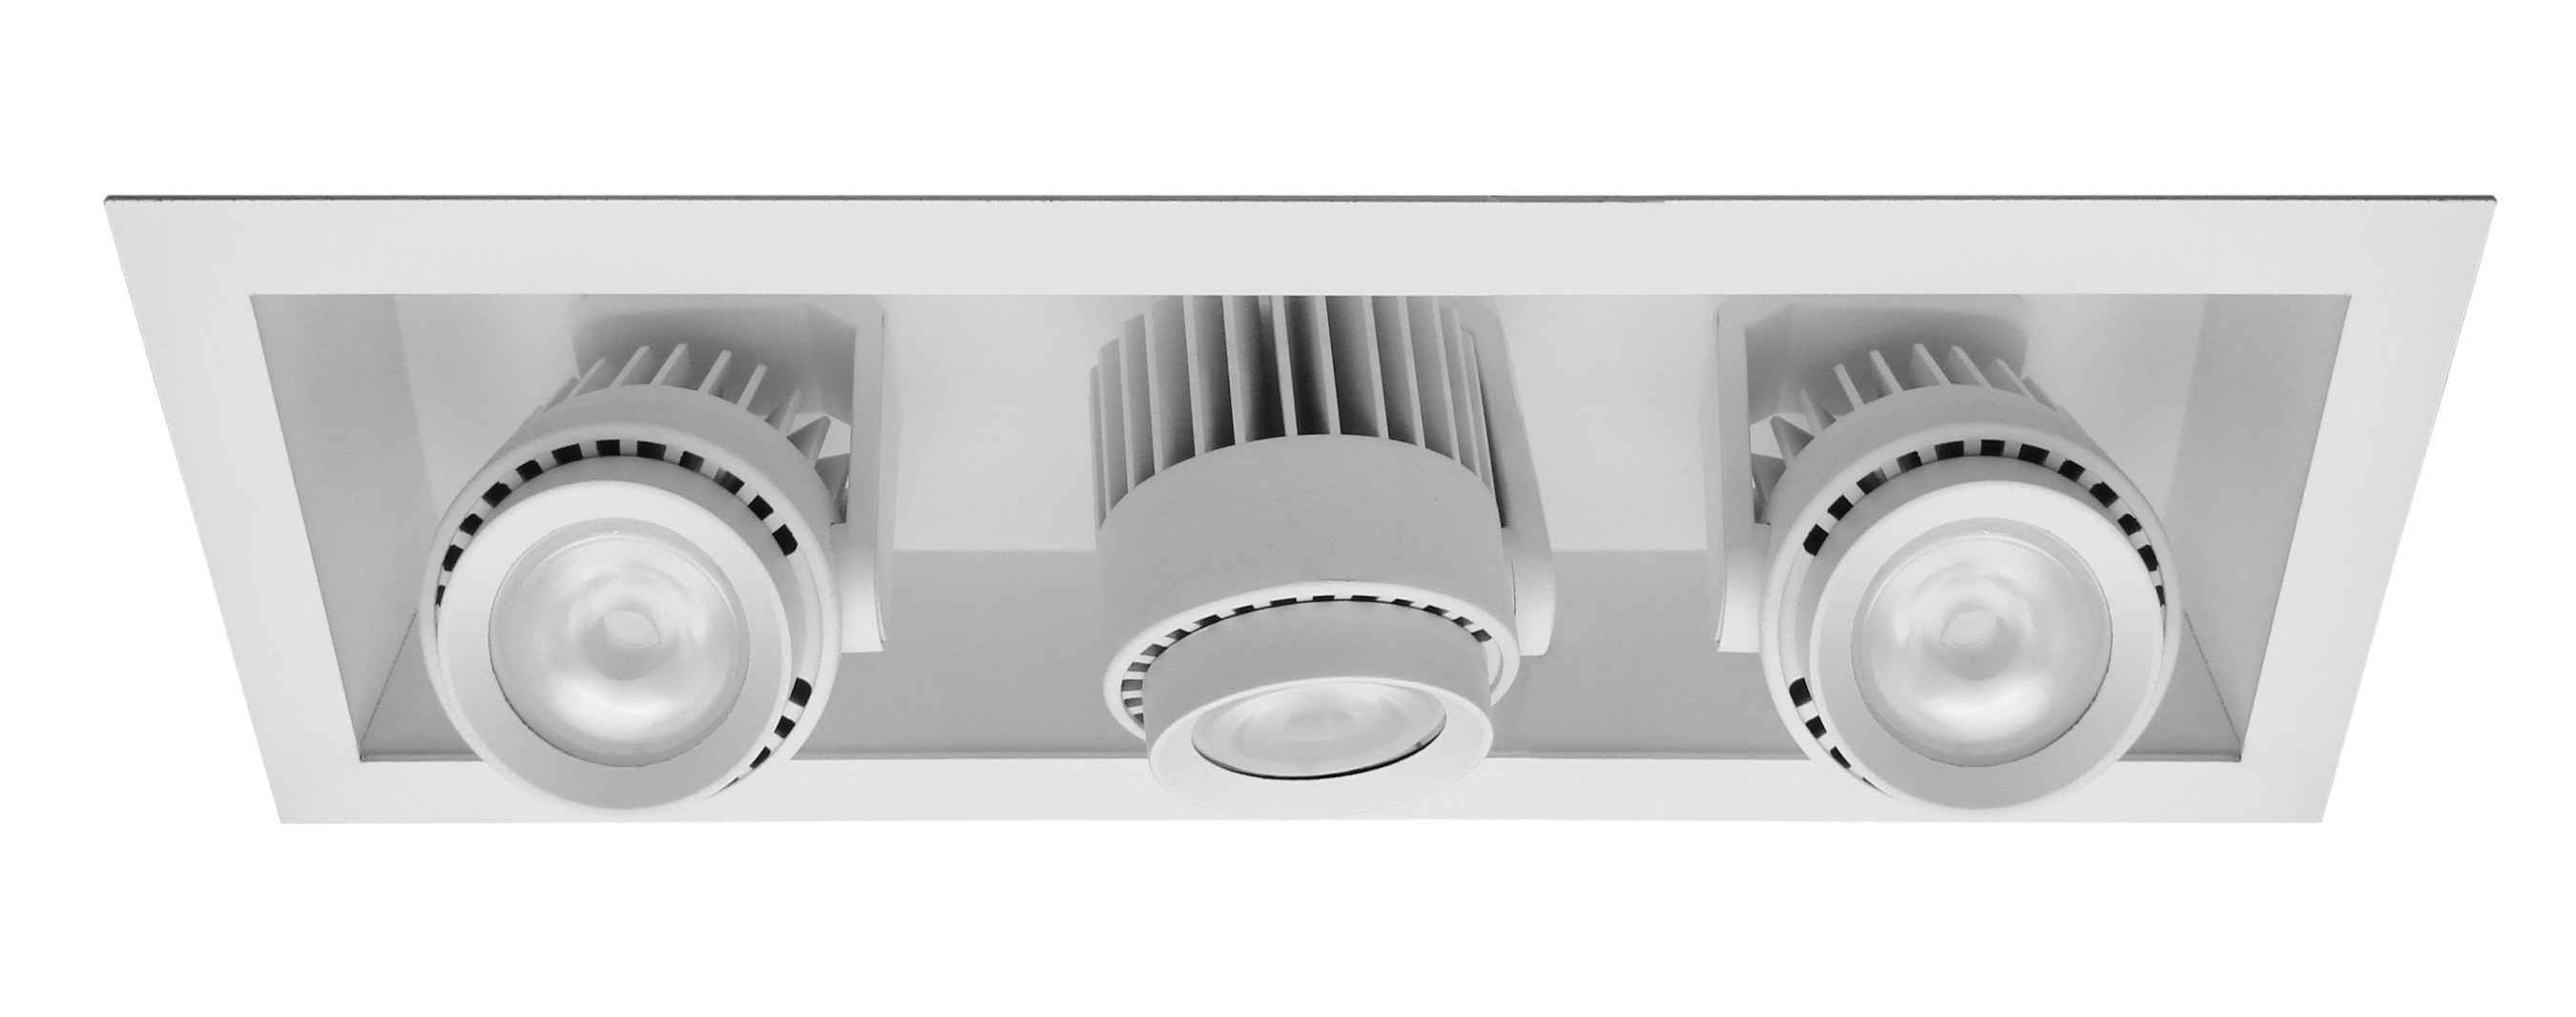 Amerlux Upgrades Hornet High Power A-14 LED Light Engine for Track, Semi-Recessed and Recessed Luminaires